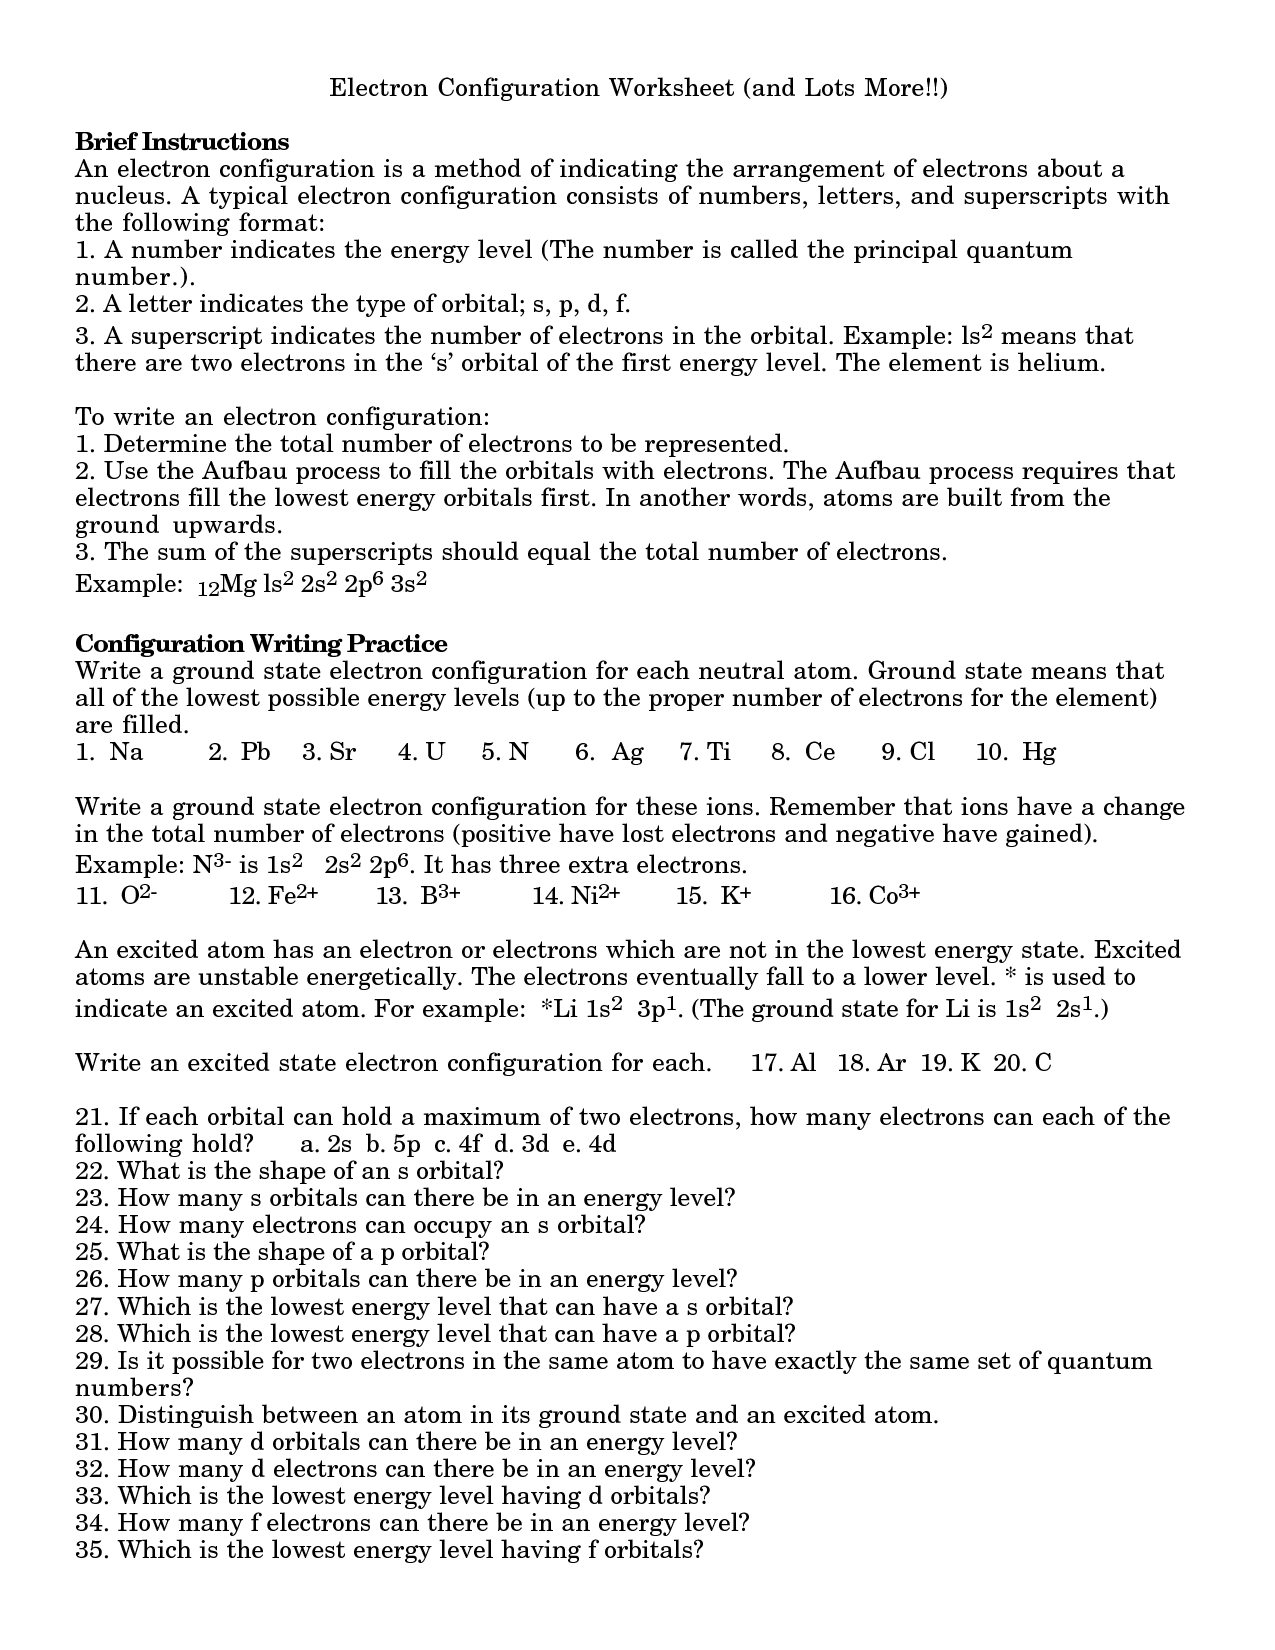 19-best-images-of-chemfiesta-worksheet-answers-electron-configuration-practice-worksheet